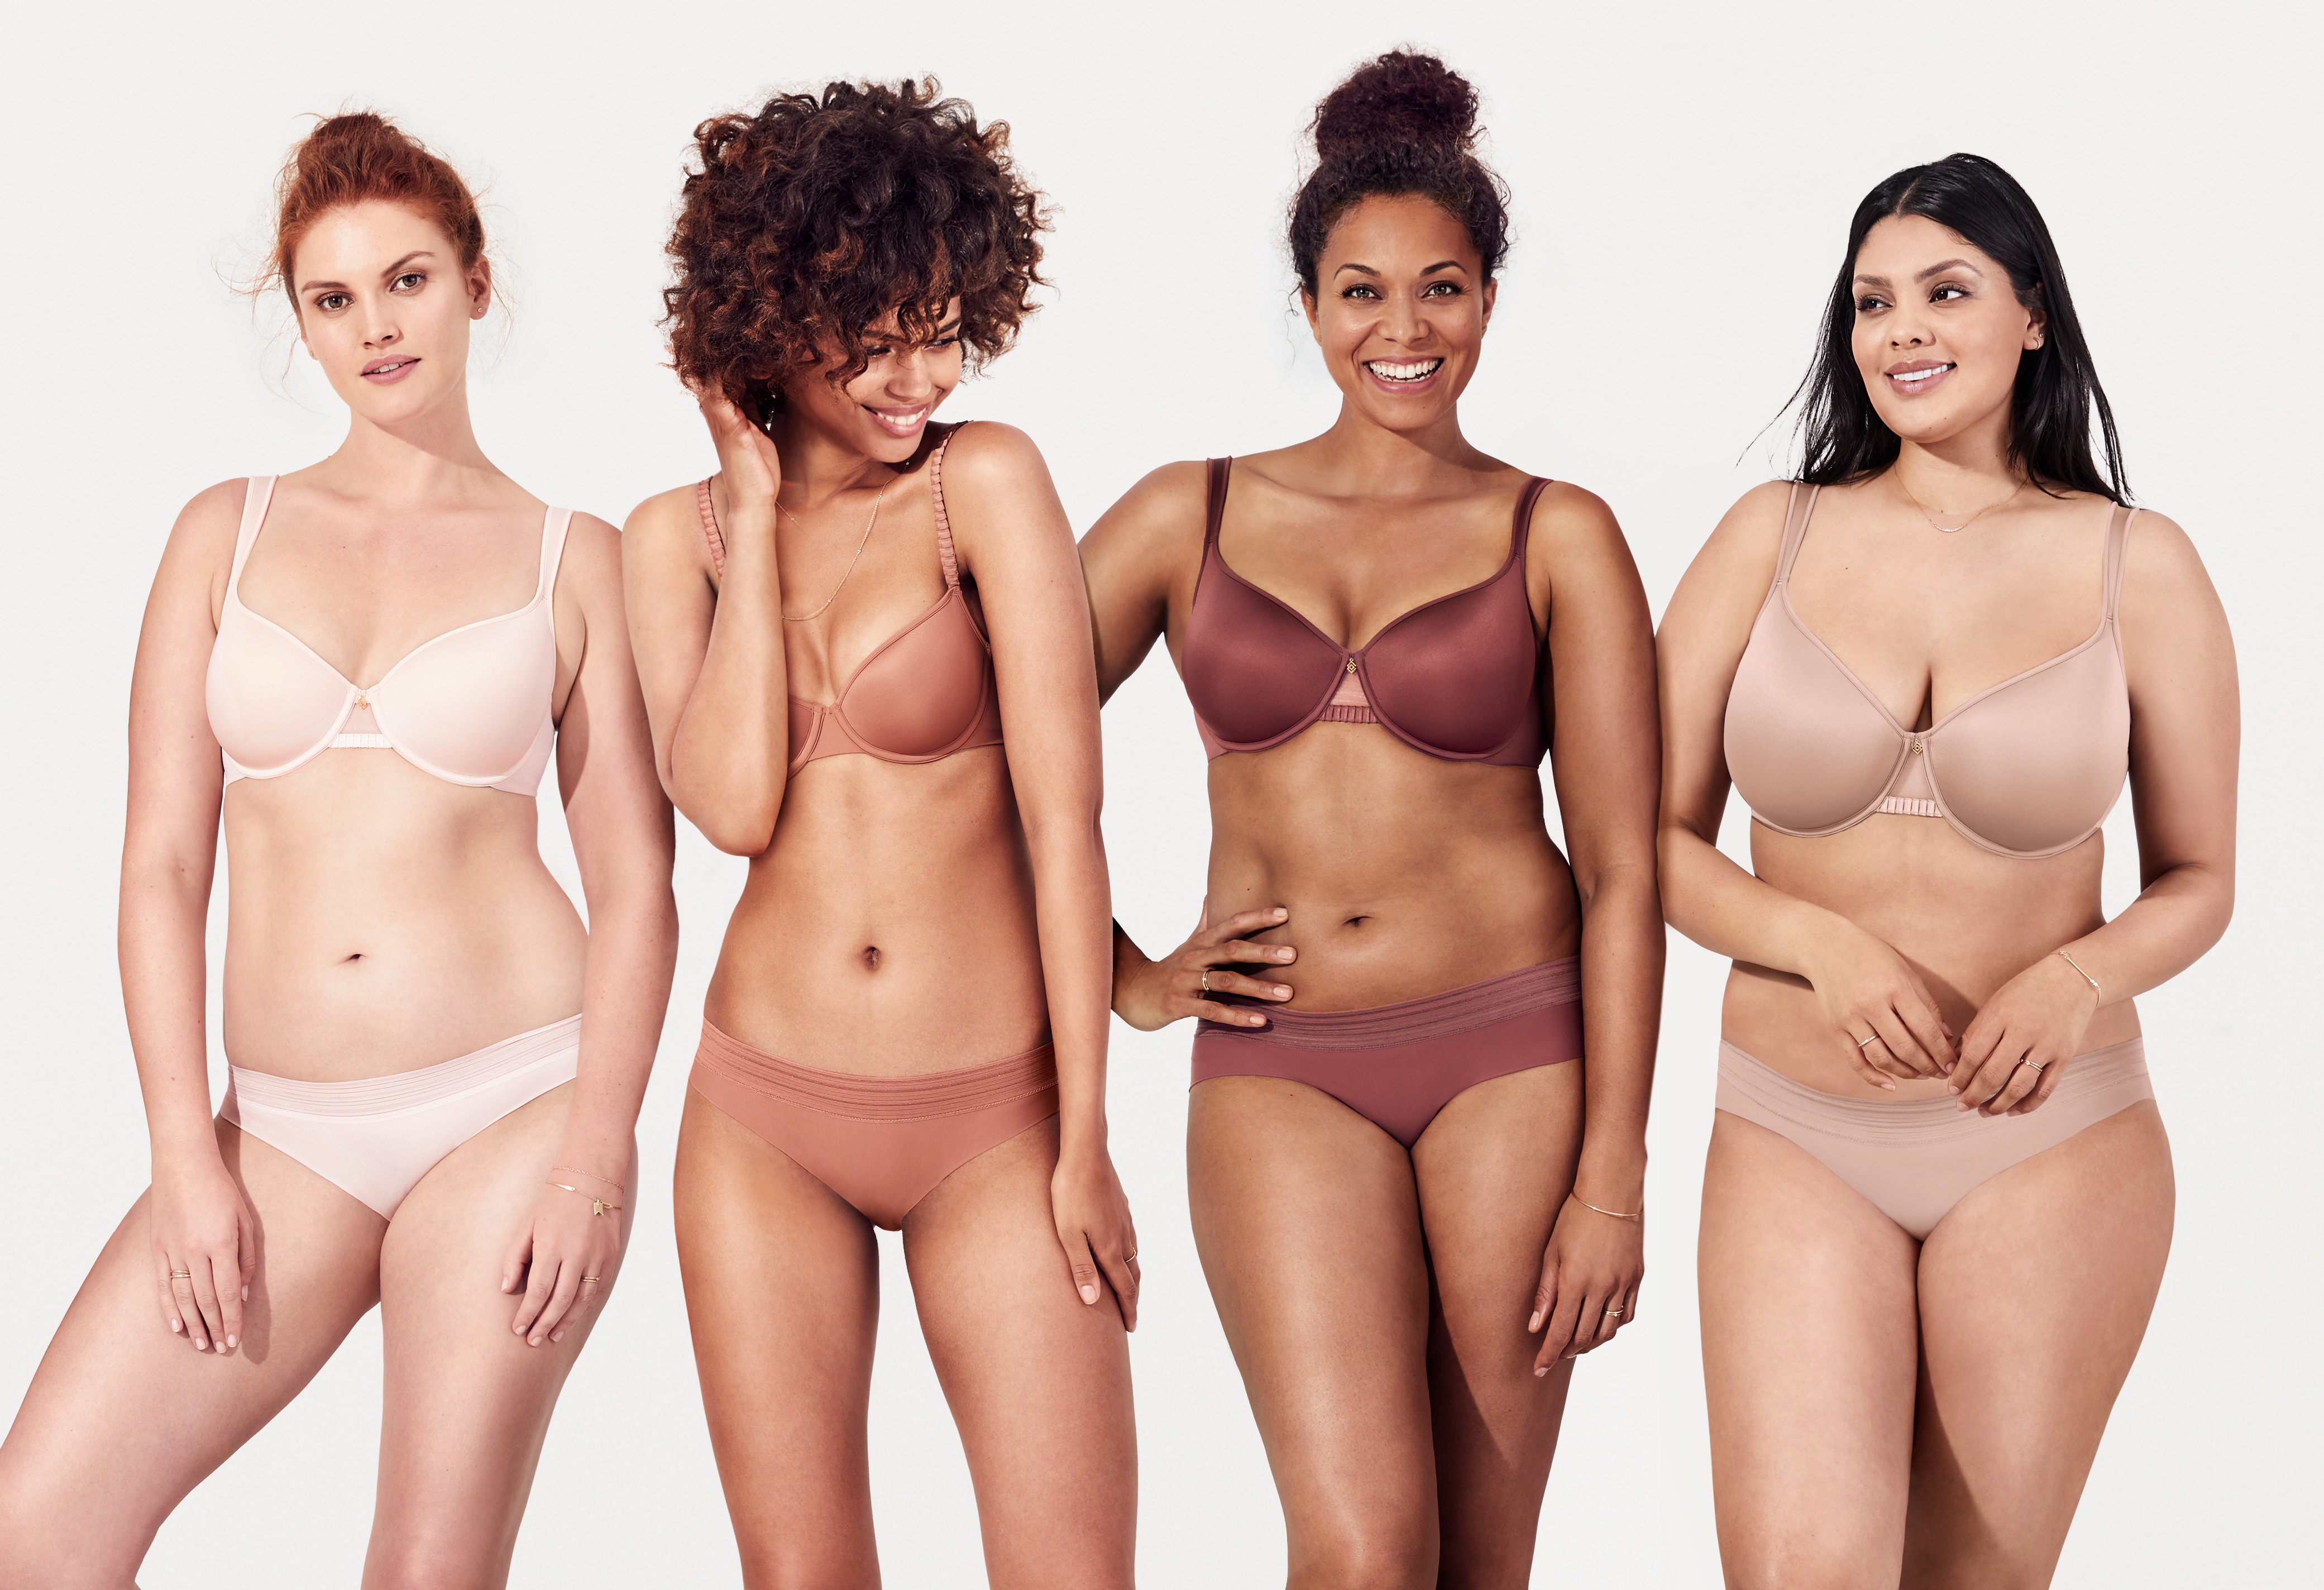 Third Love lingerie brand reveals seven different breast shapes